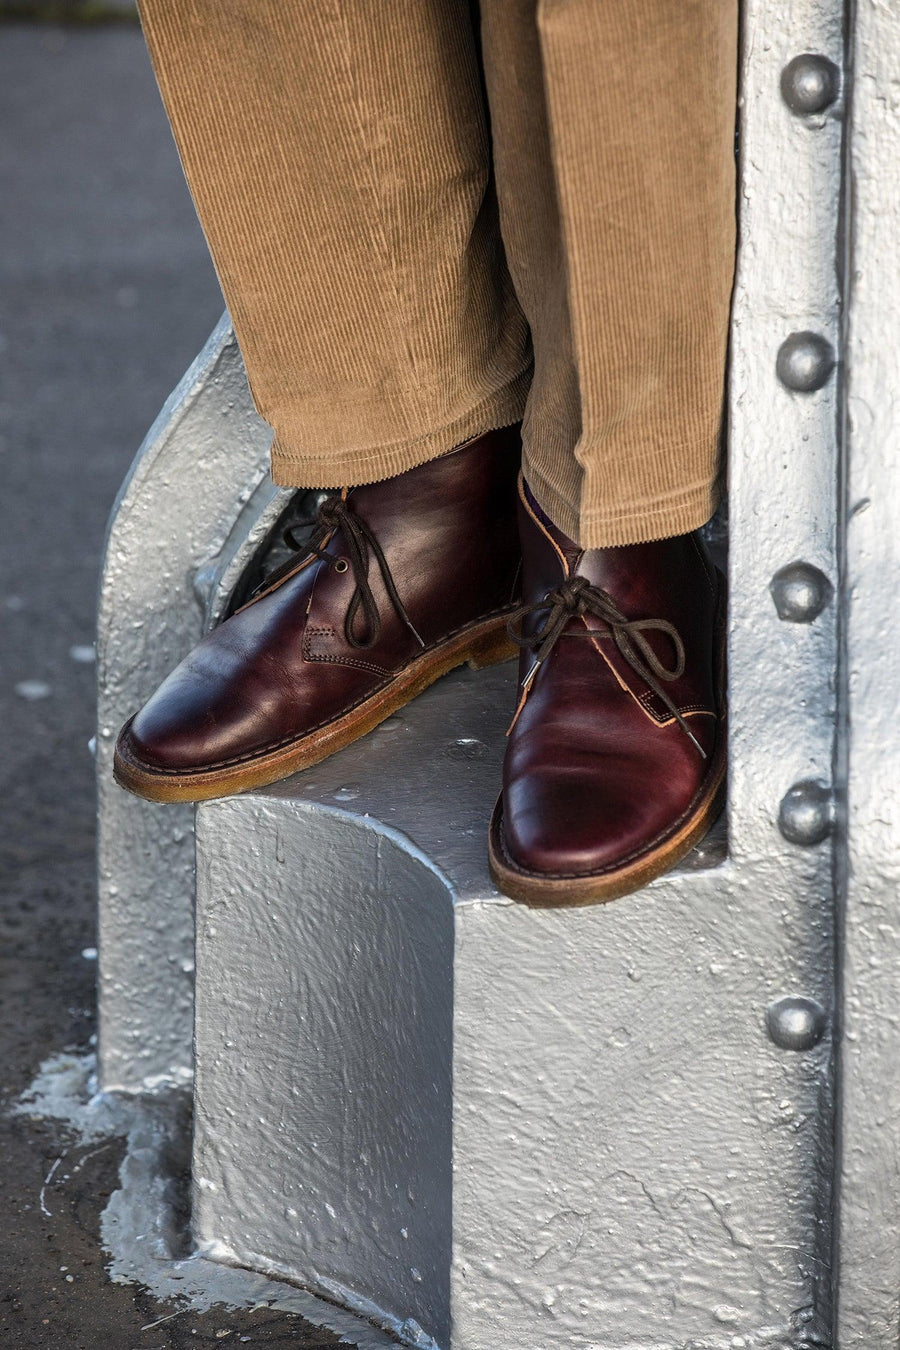 Les Indispensibles Style The Woodford Desert Boot in No 8 Chromexcel - Crown Northampton